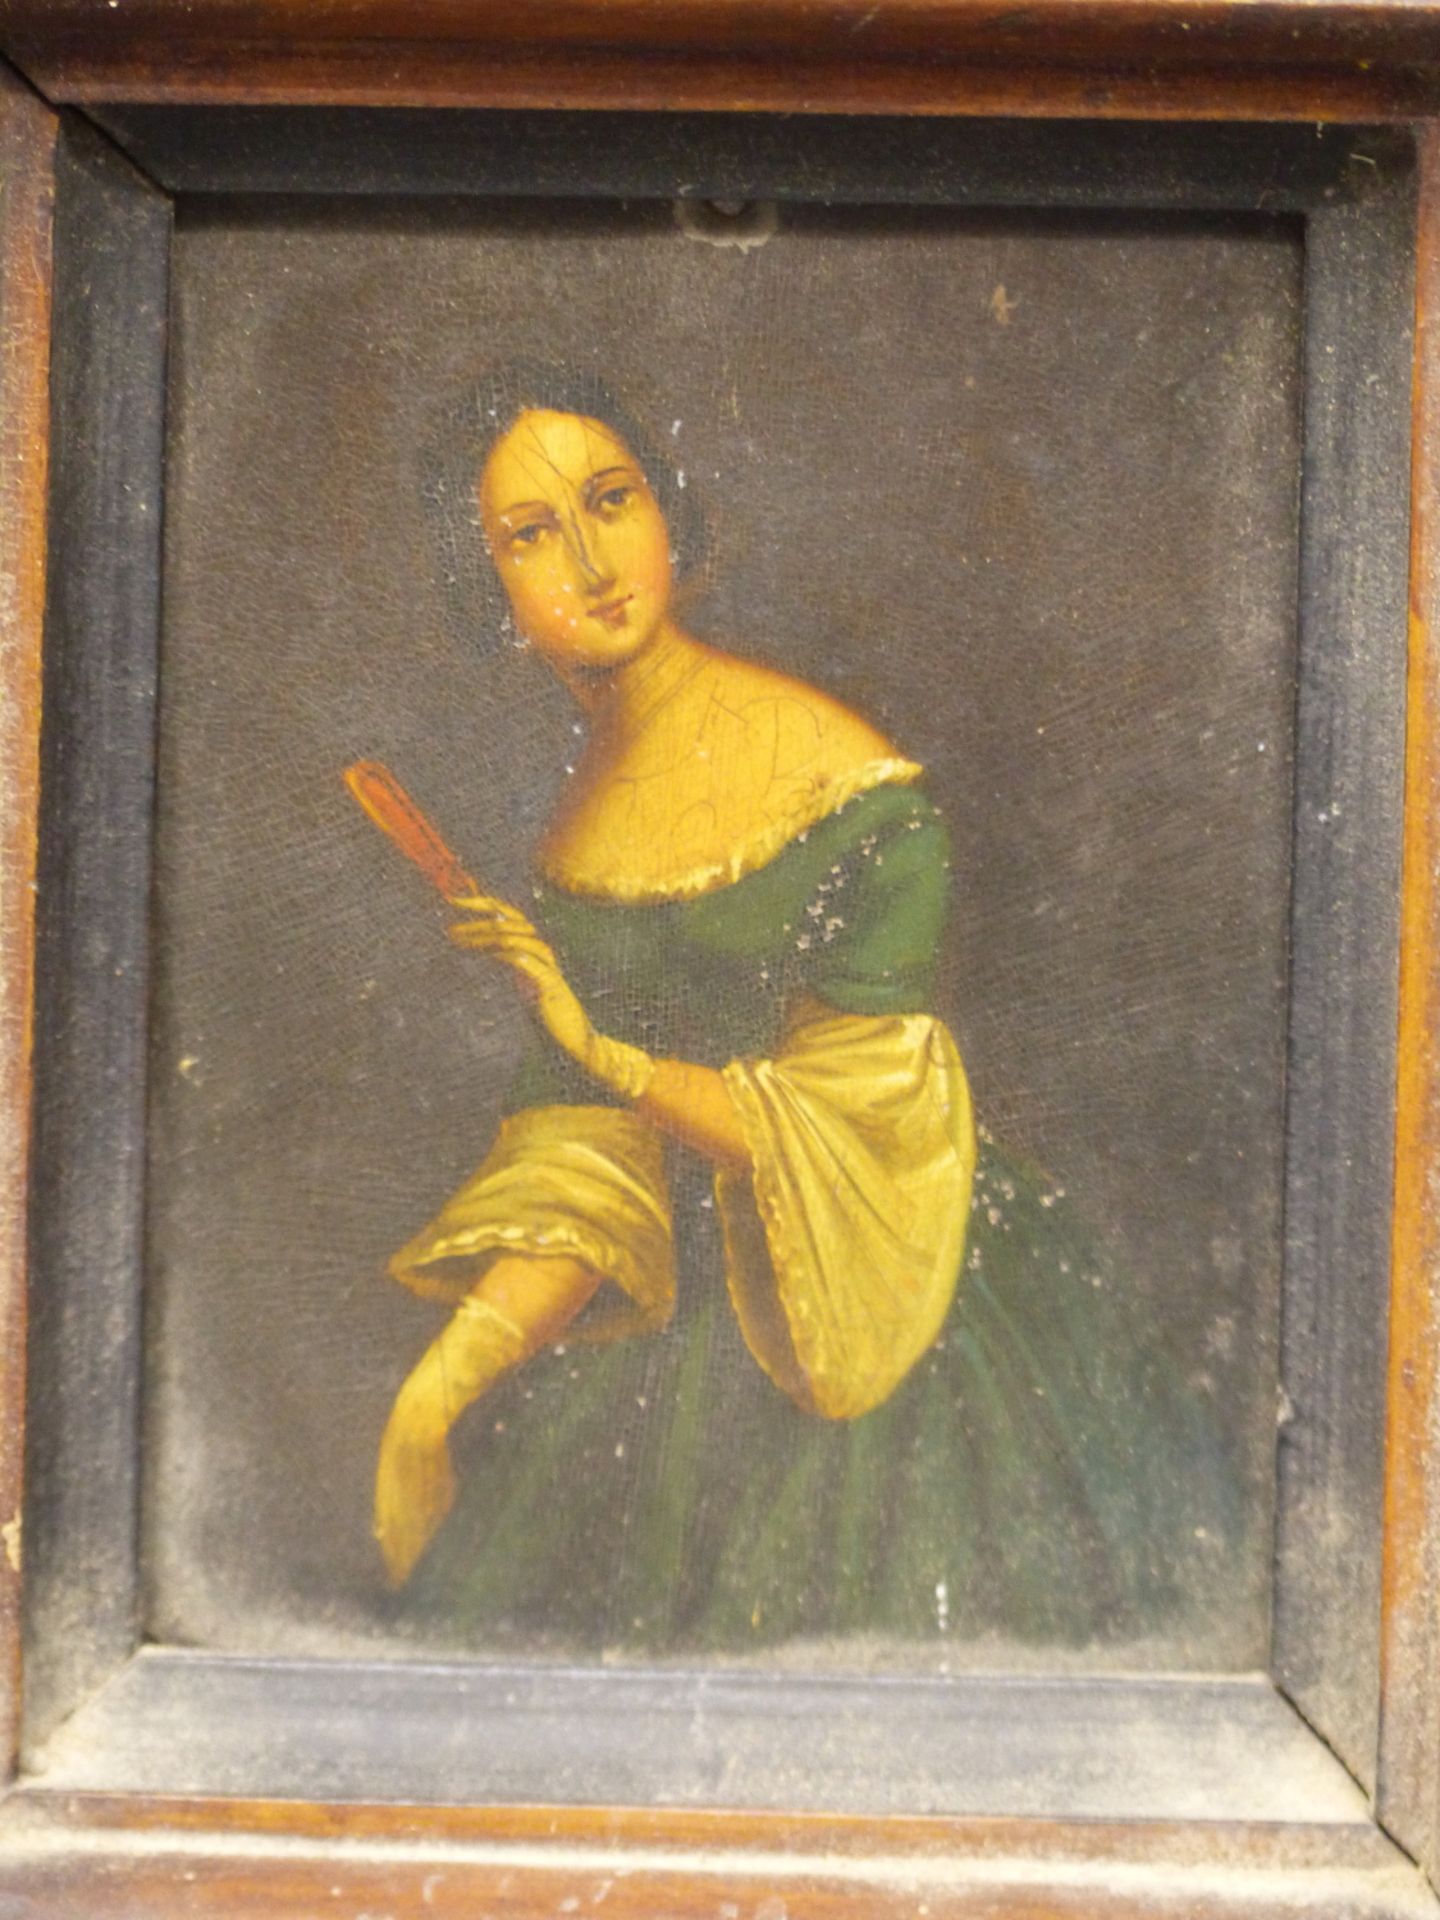 19TH CENTURY CONTINENTAL SCHOOL, STUDY OF A YOUNG LADY, OIL ON METAL PANEL. 7.5 X 10 cm. - Image 2 of 5